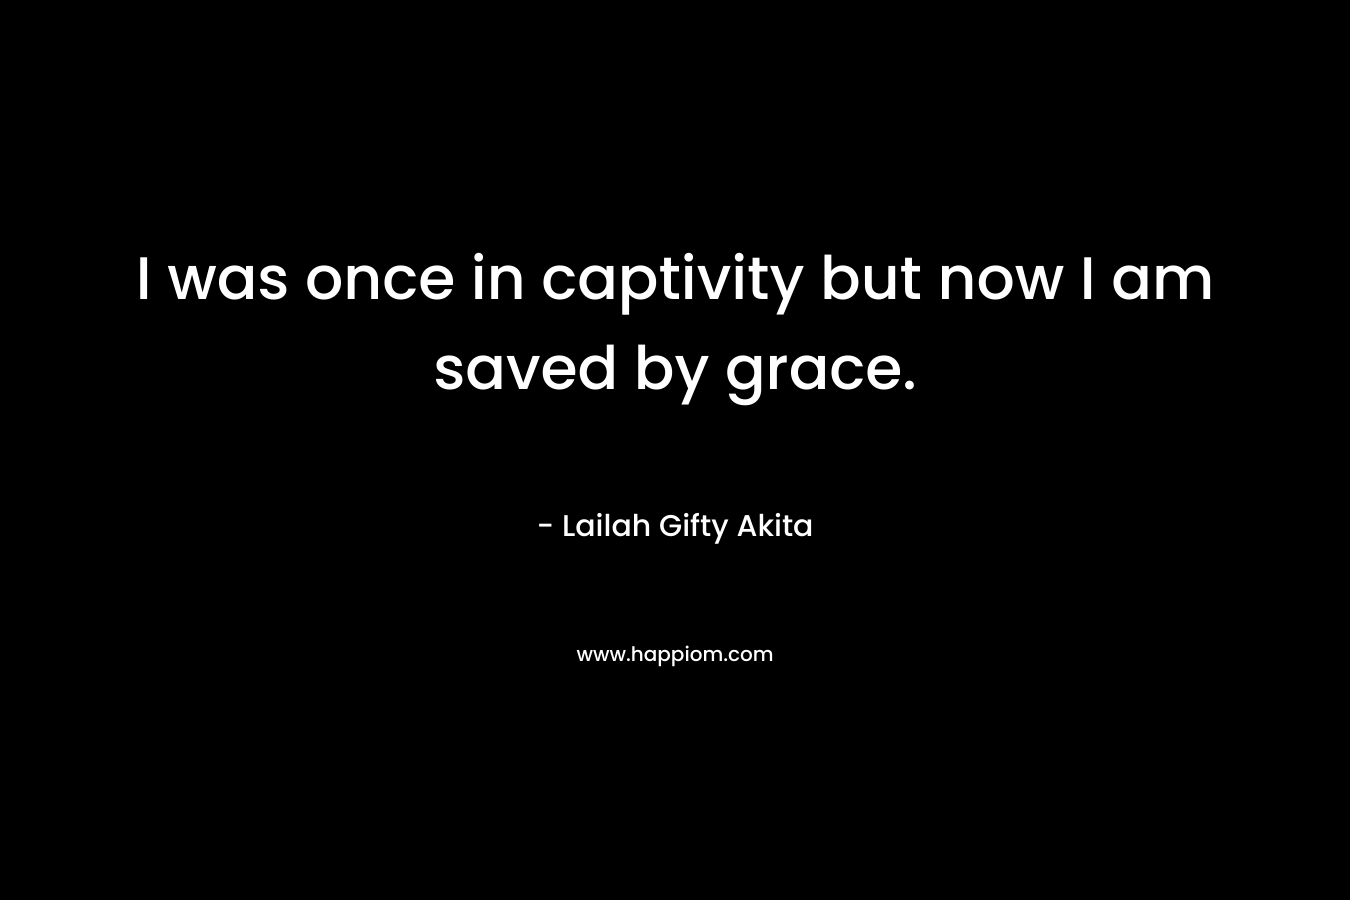 I was once in captivity but now I am saved by grace. – Lailah Gifty Akita